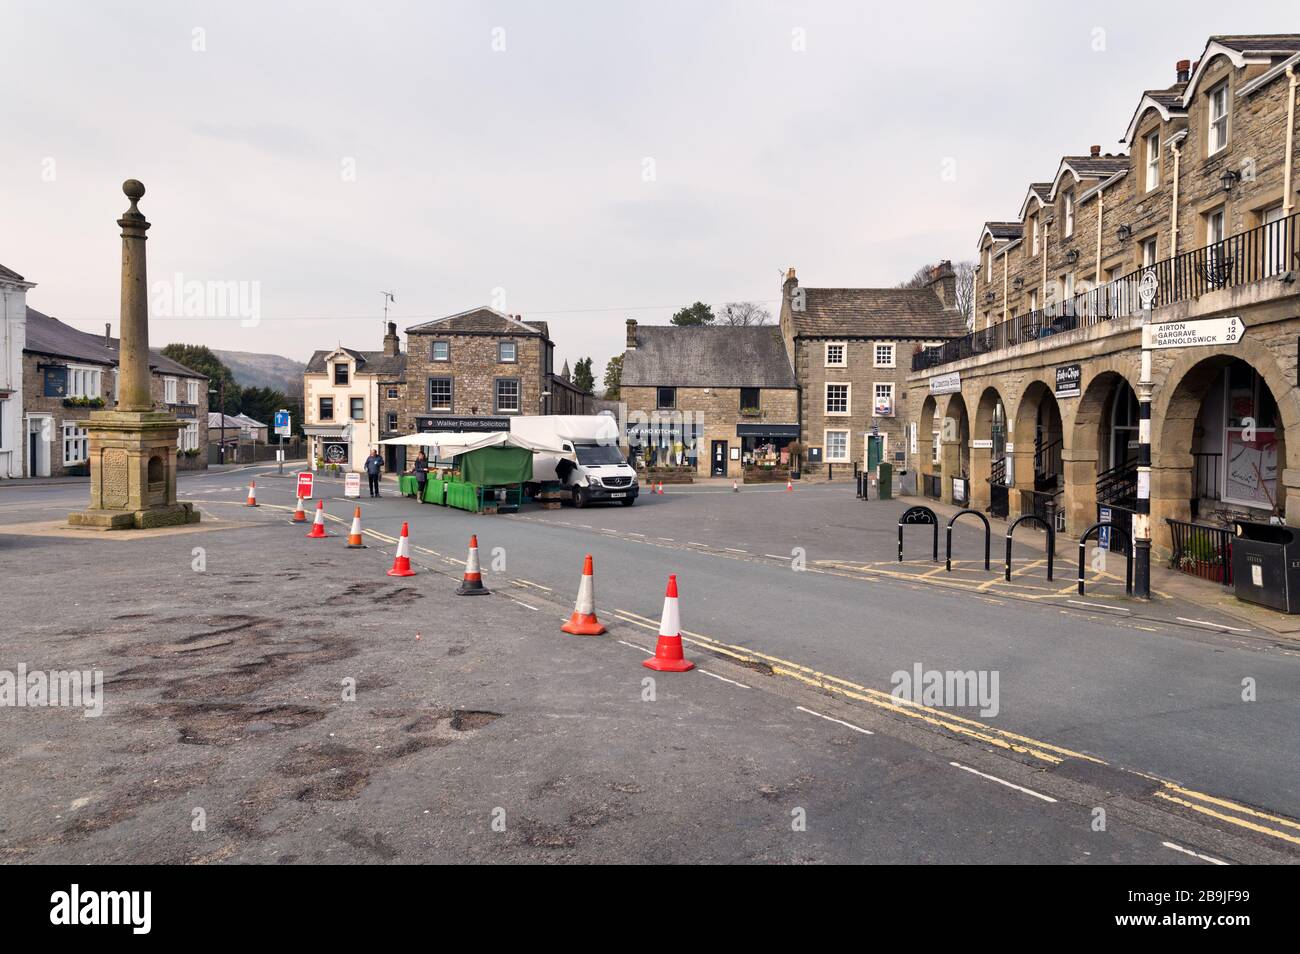 Settle, North Yorkshire, UK. 24th Mar 2020. The nearly empty market place on Market Day in Settle on the edge of the Yorkshire Dales National Park. Few stalls were in evidence of day 1 of the major shutdown due to the Coronavirus crisis.  Credit: John Bentley/Alamy Live News Stock Photo